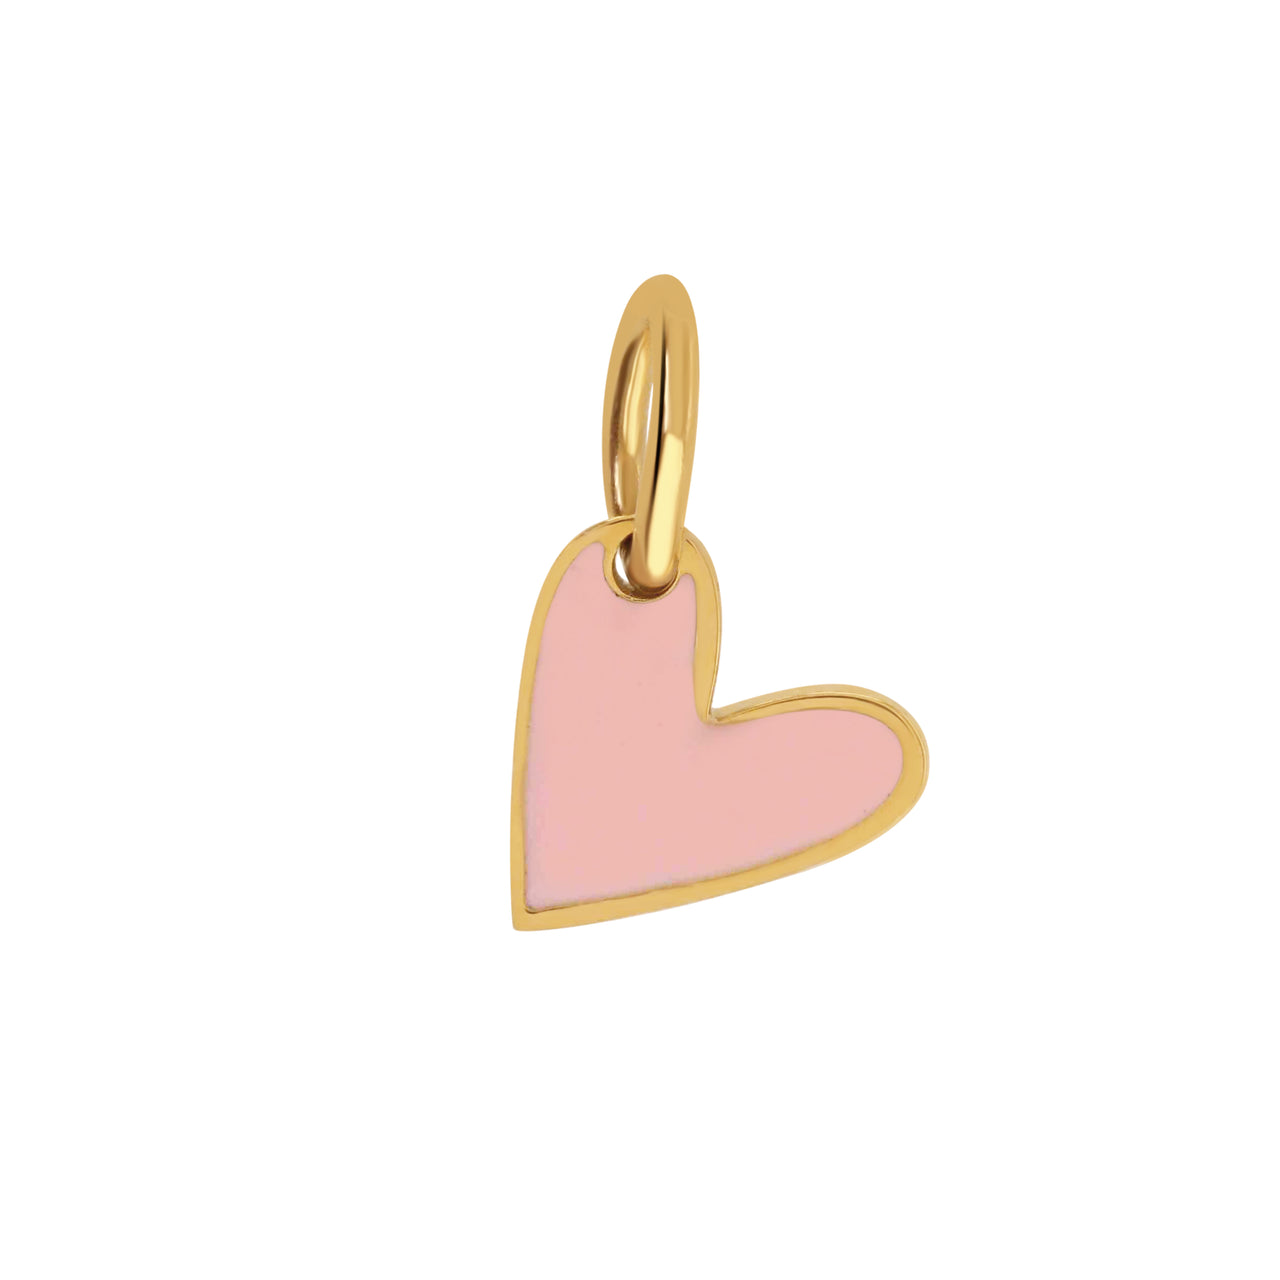 Gold heart charm with pink enamel